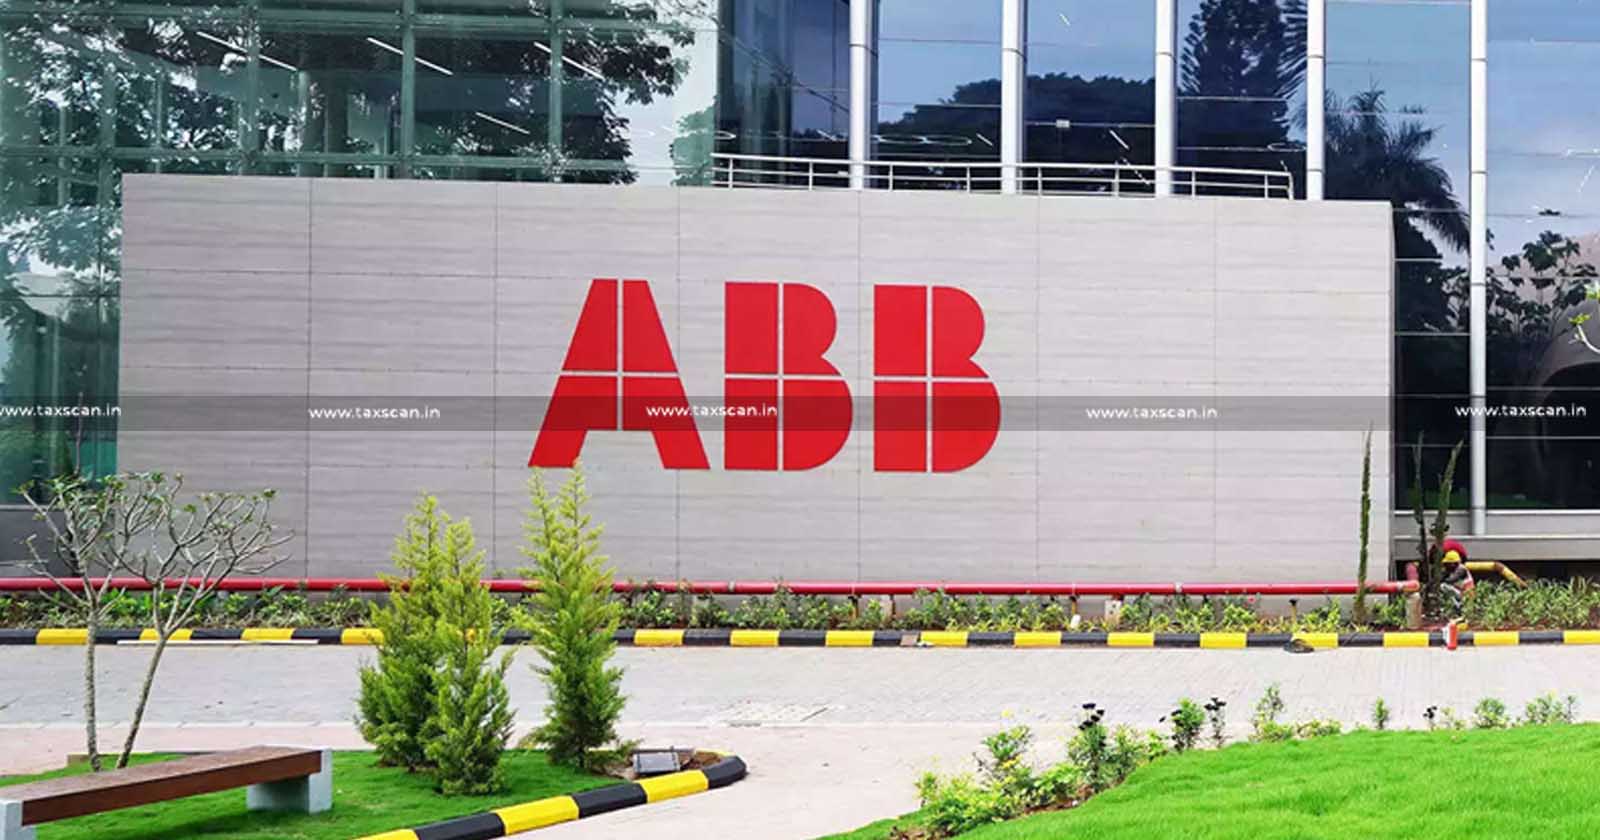 CA Vacancy In ABB - Chartered Accountant Vacancy In ABB - ABB Hiring - ABB Careers - CA Opportunities In ABB - Taxscan